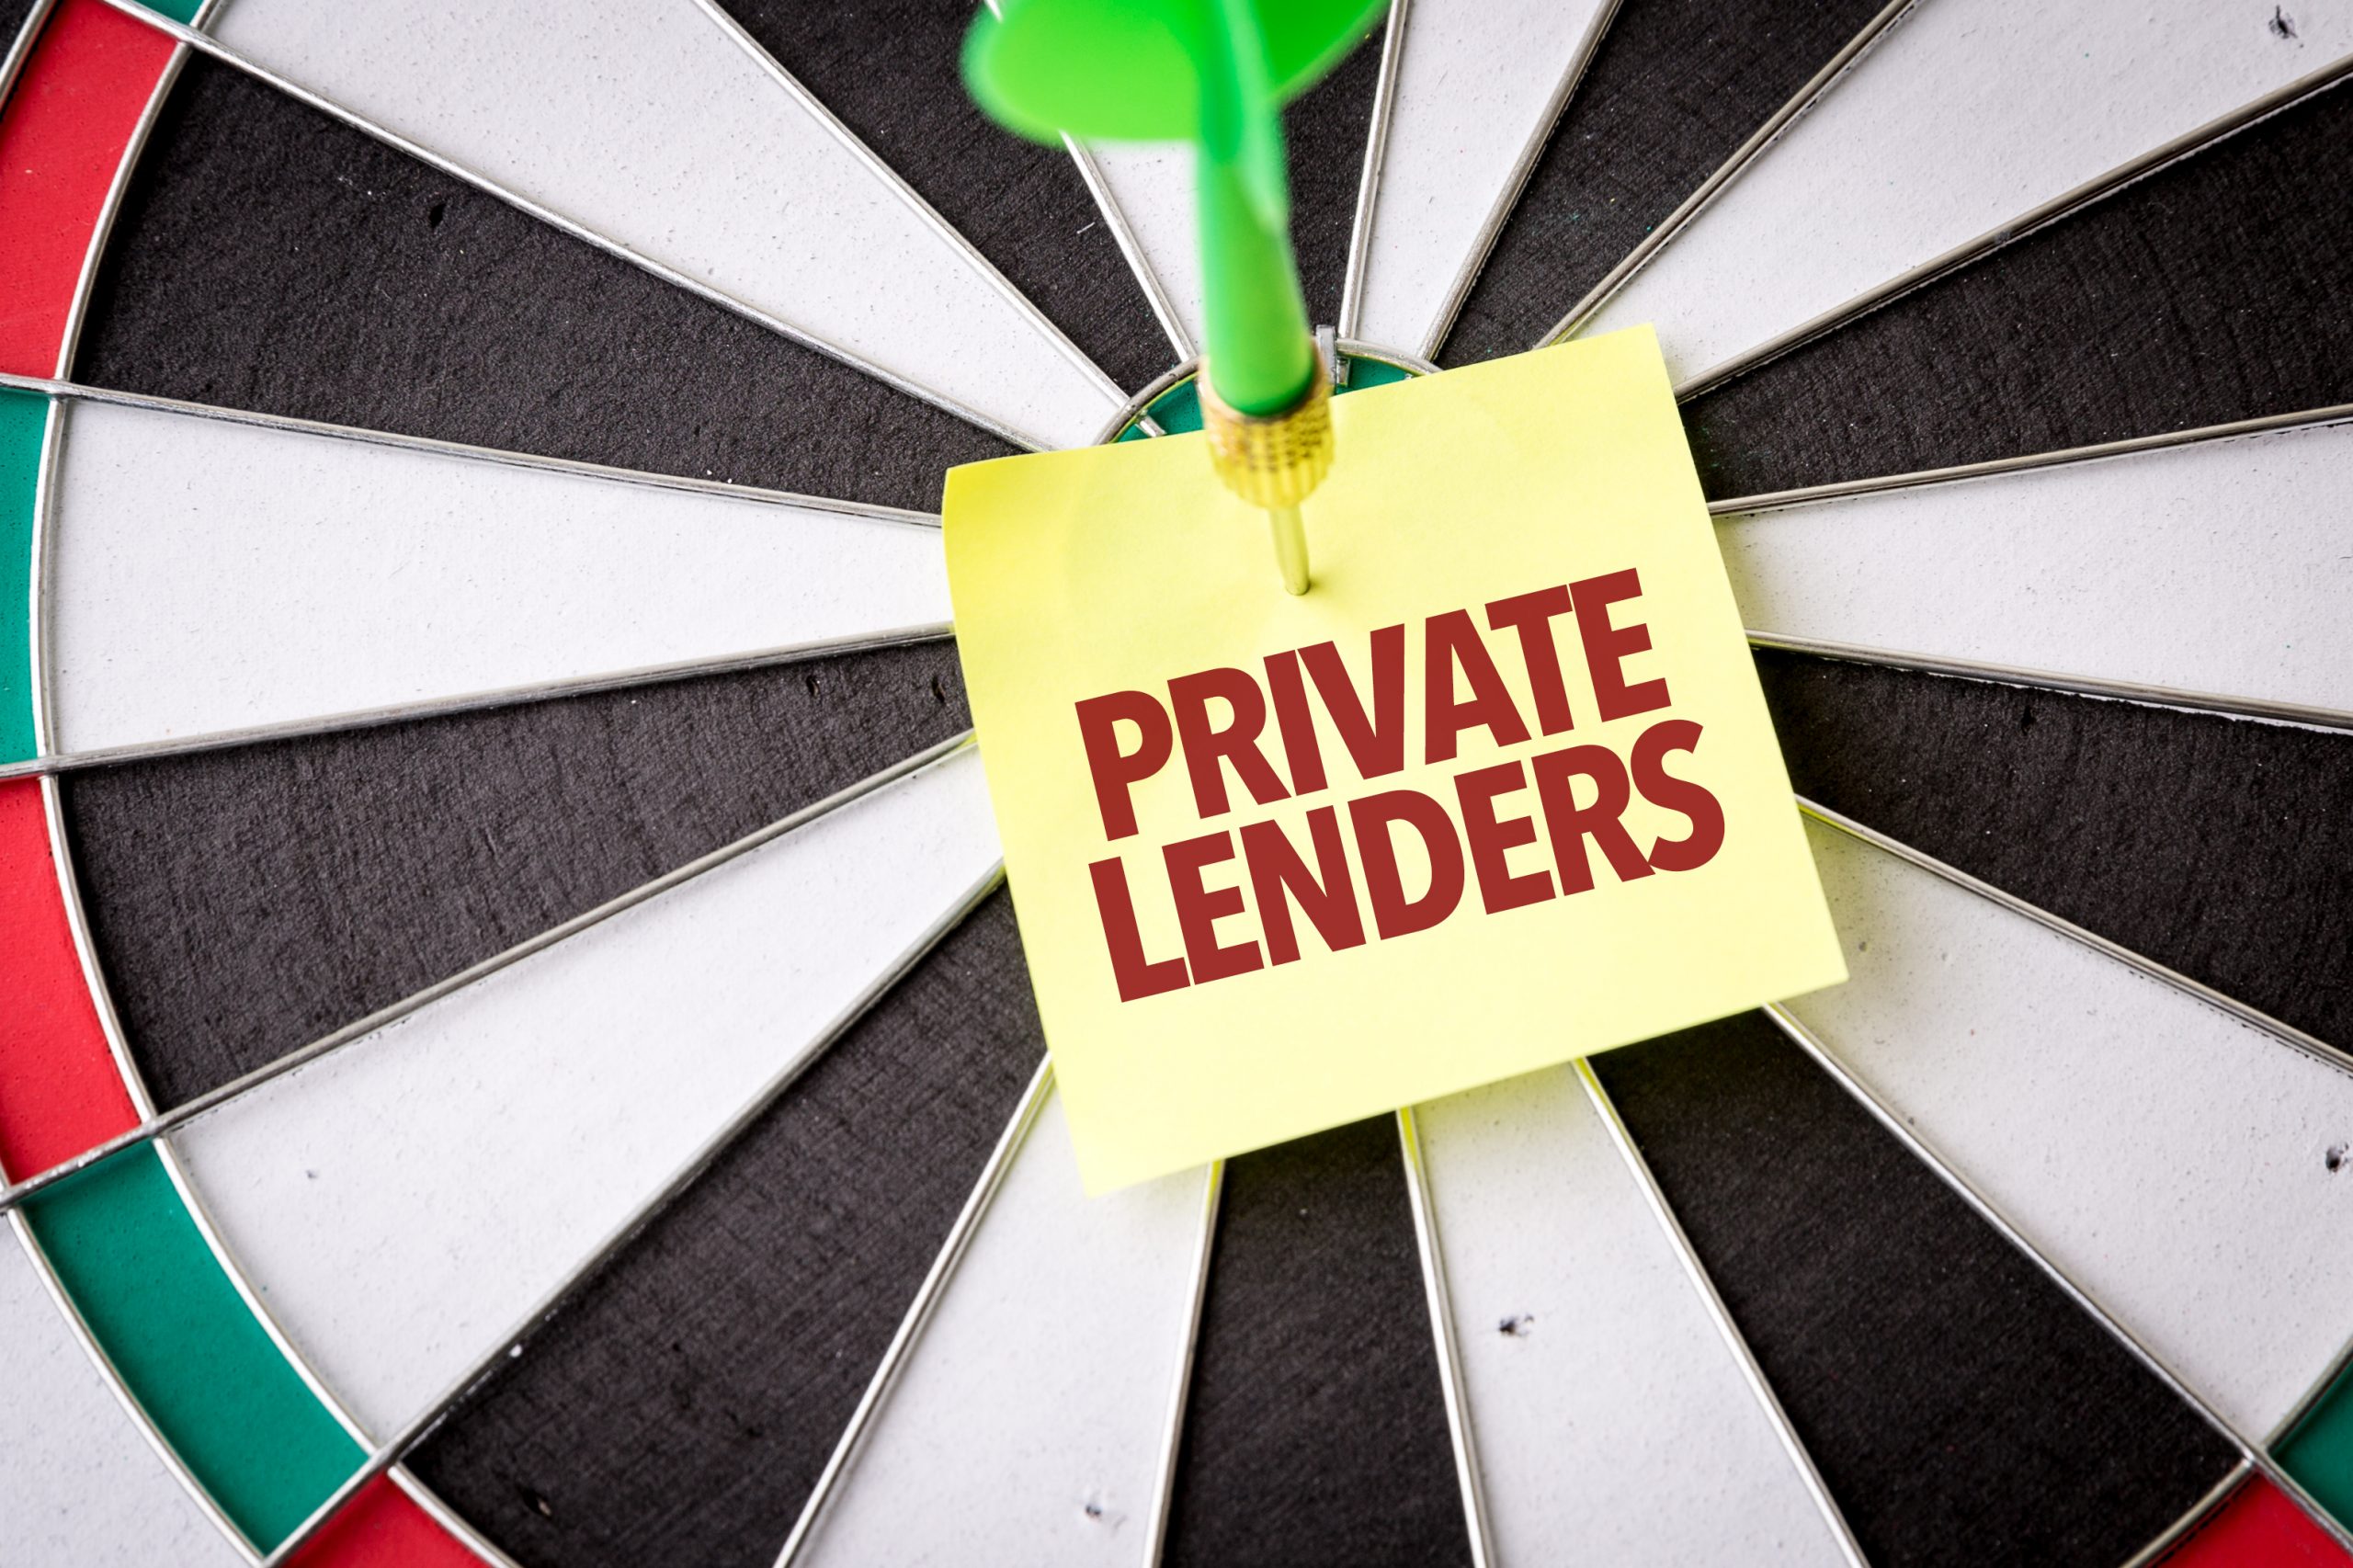 dartboard with a post-it note stuck to it with "private lenders" written on it